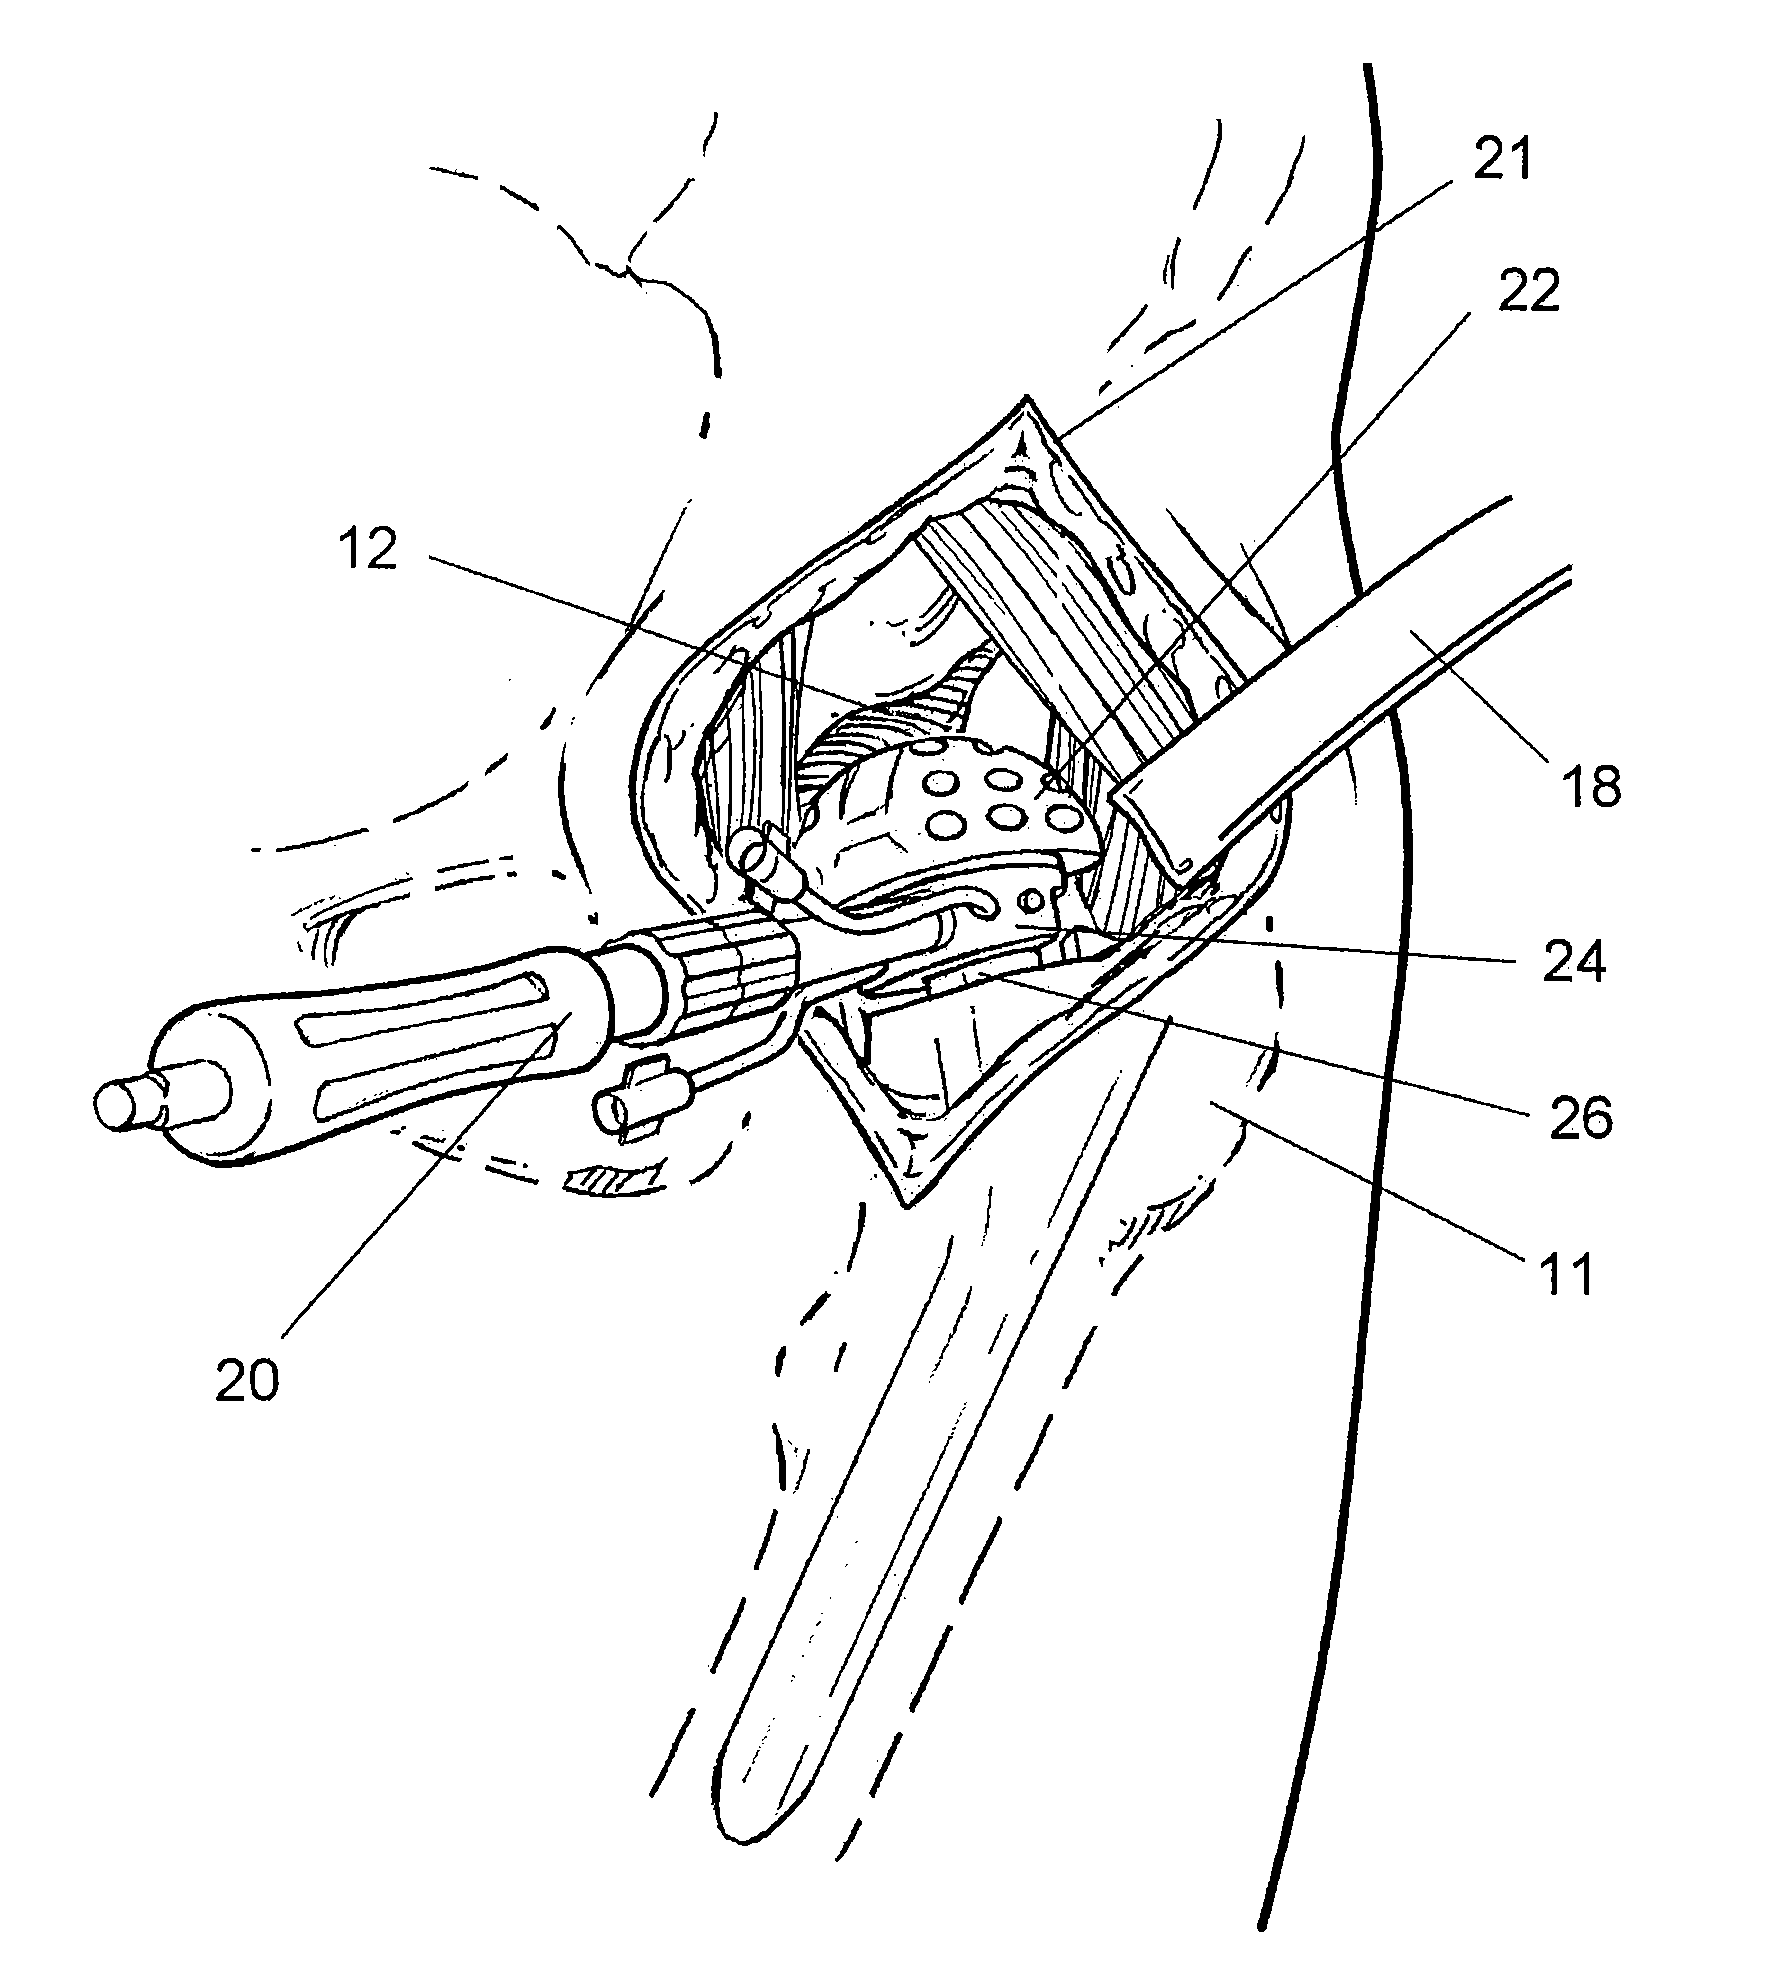 Apparatus and method for minimally invasive total joint replacement